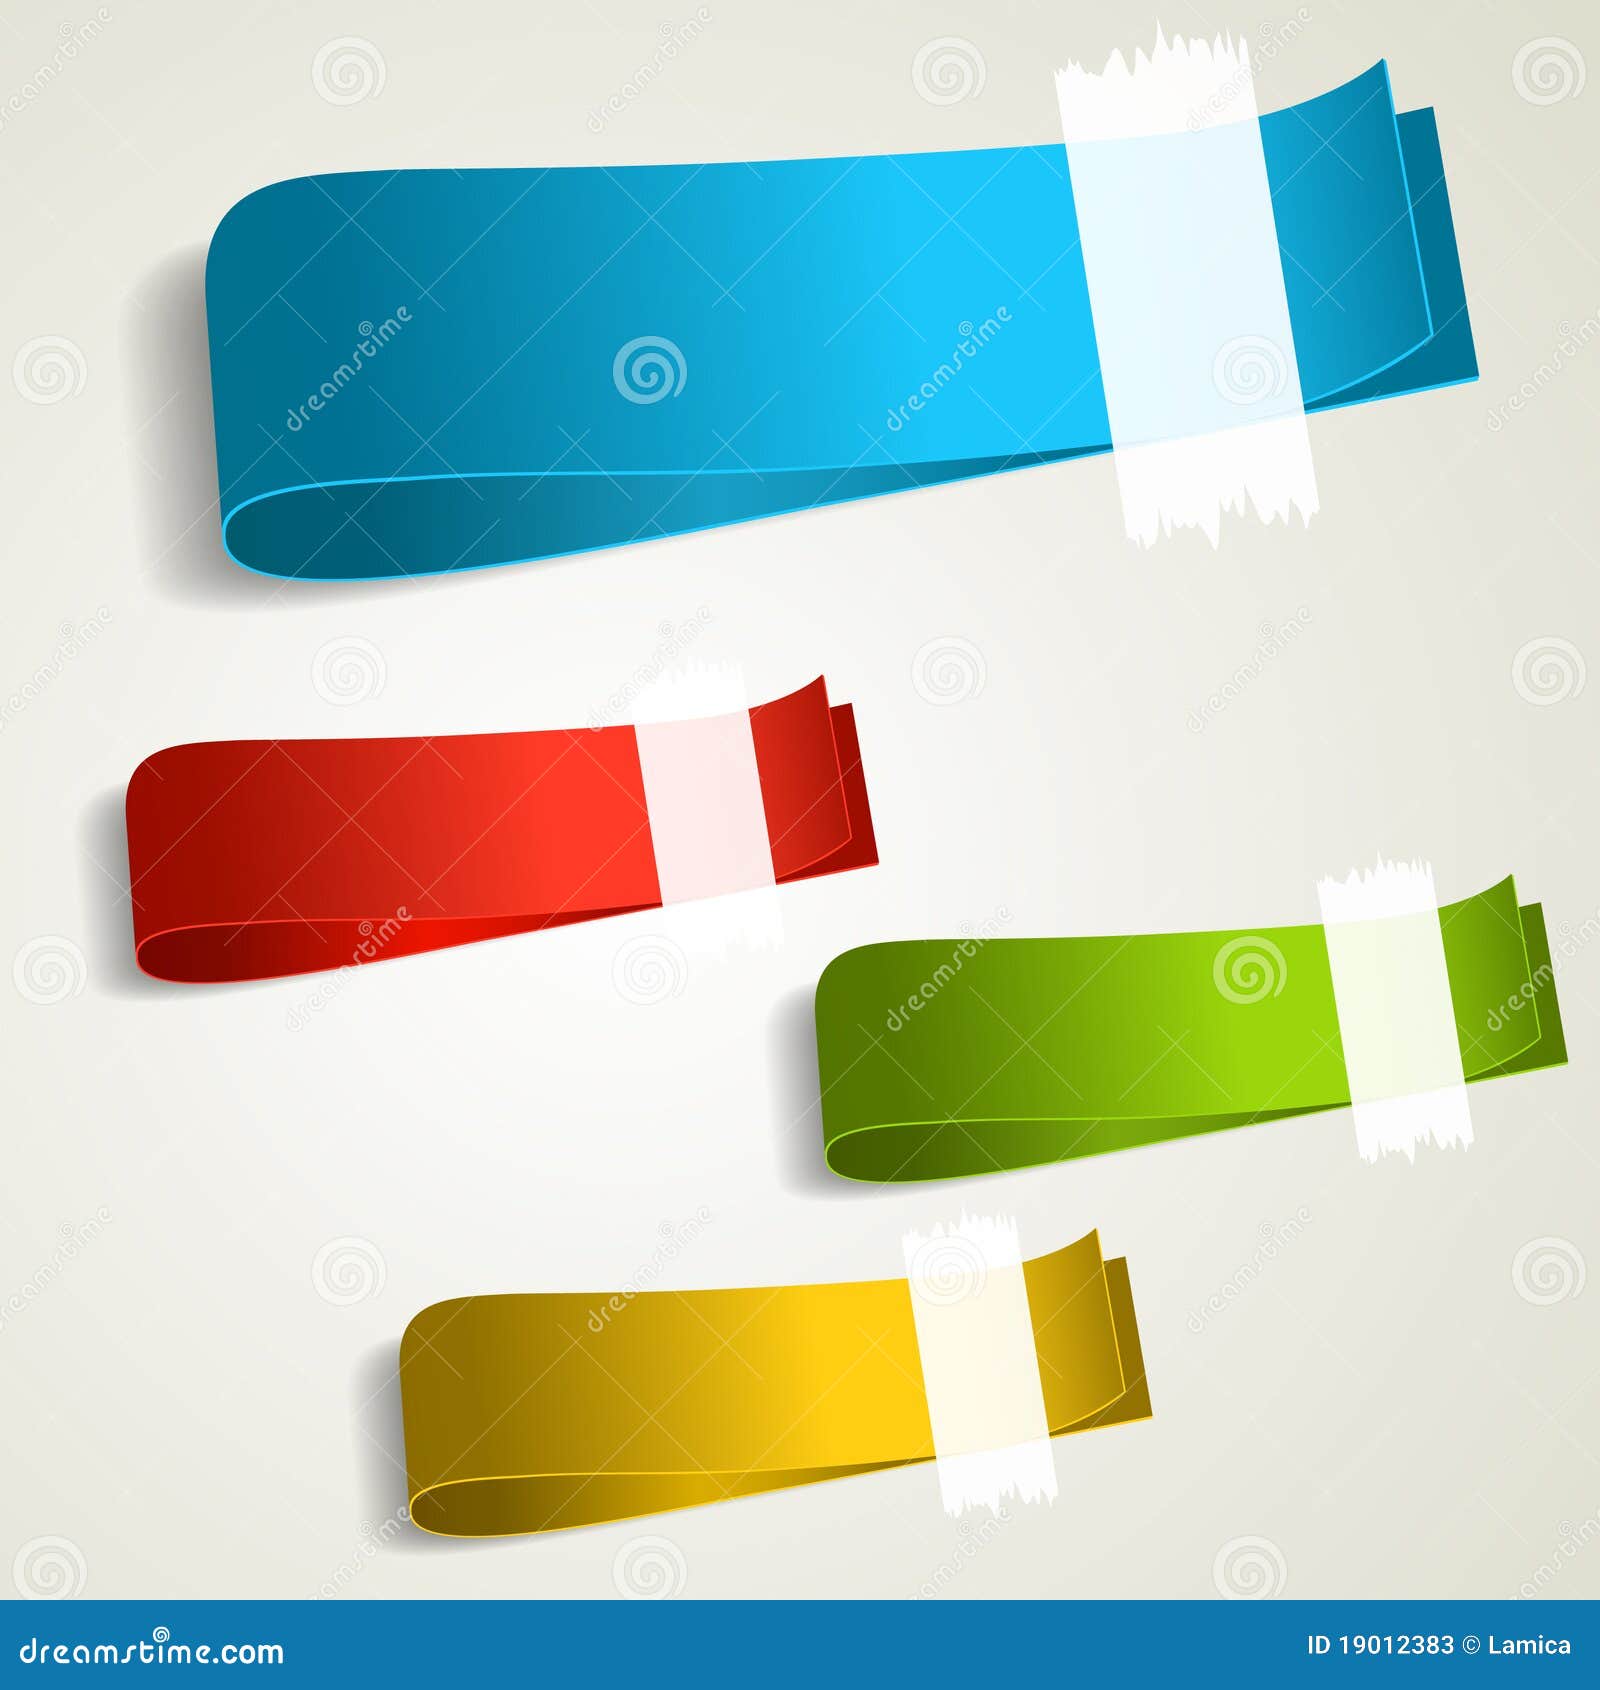 Set of colorful tag labels stock vector. Illustration of plaster - 19012383